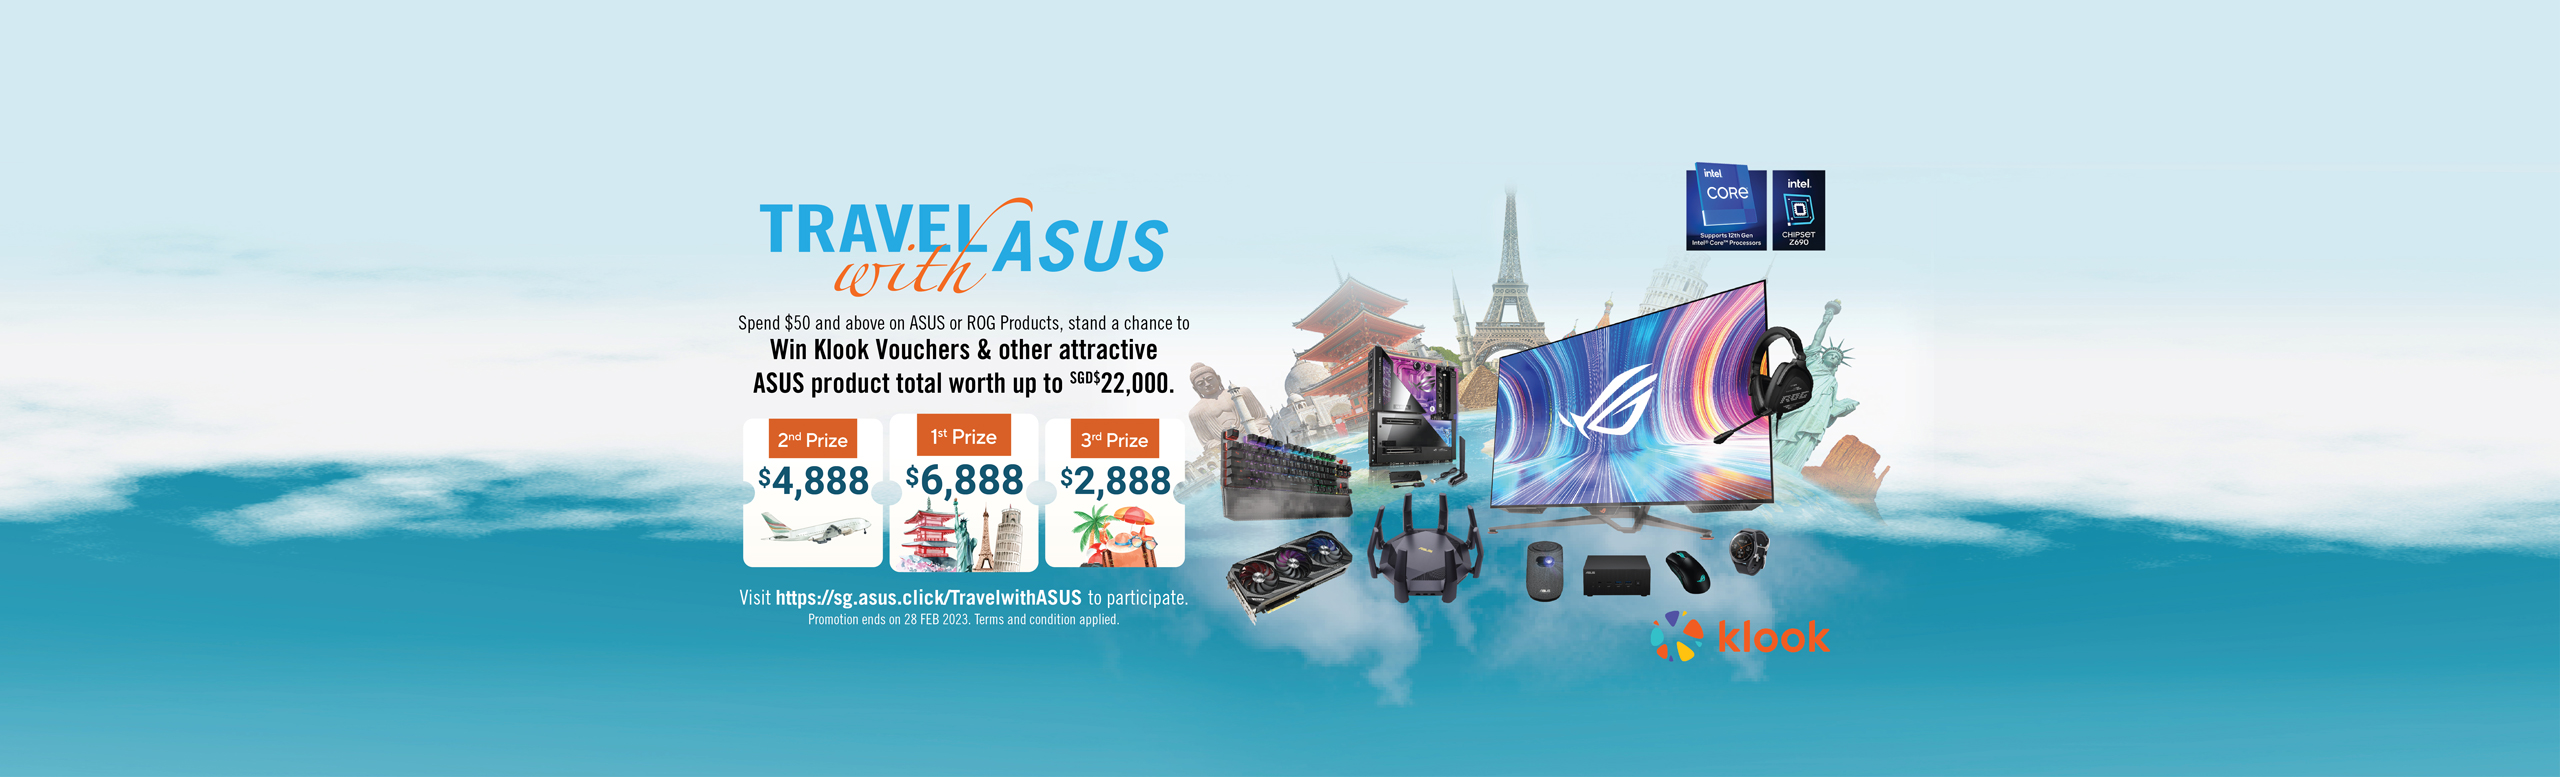 TRAVEL WITH ASUS